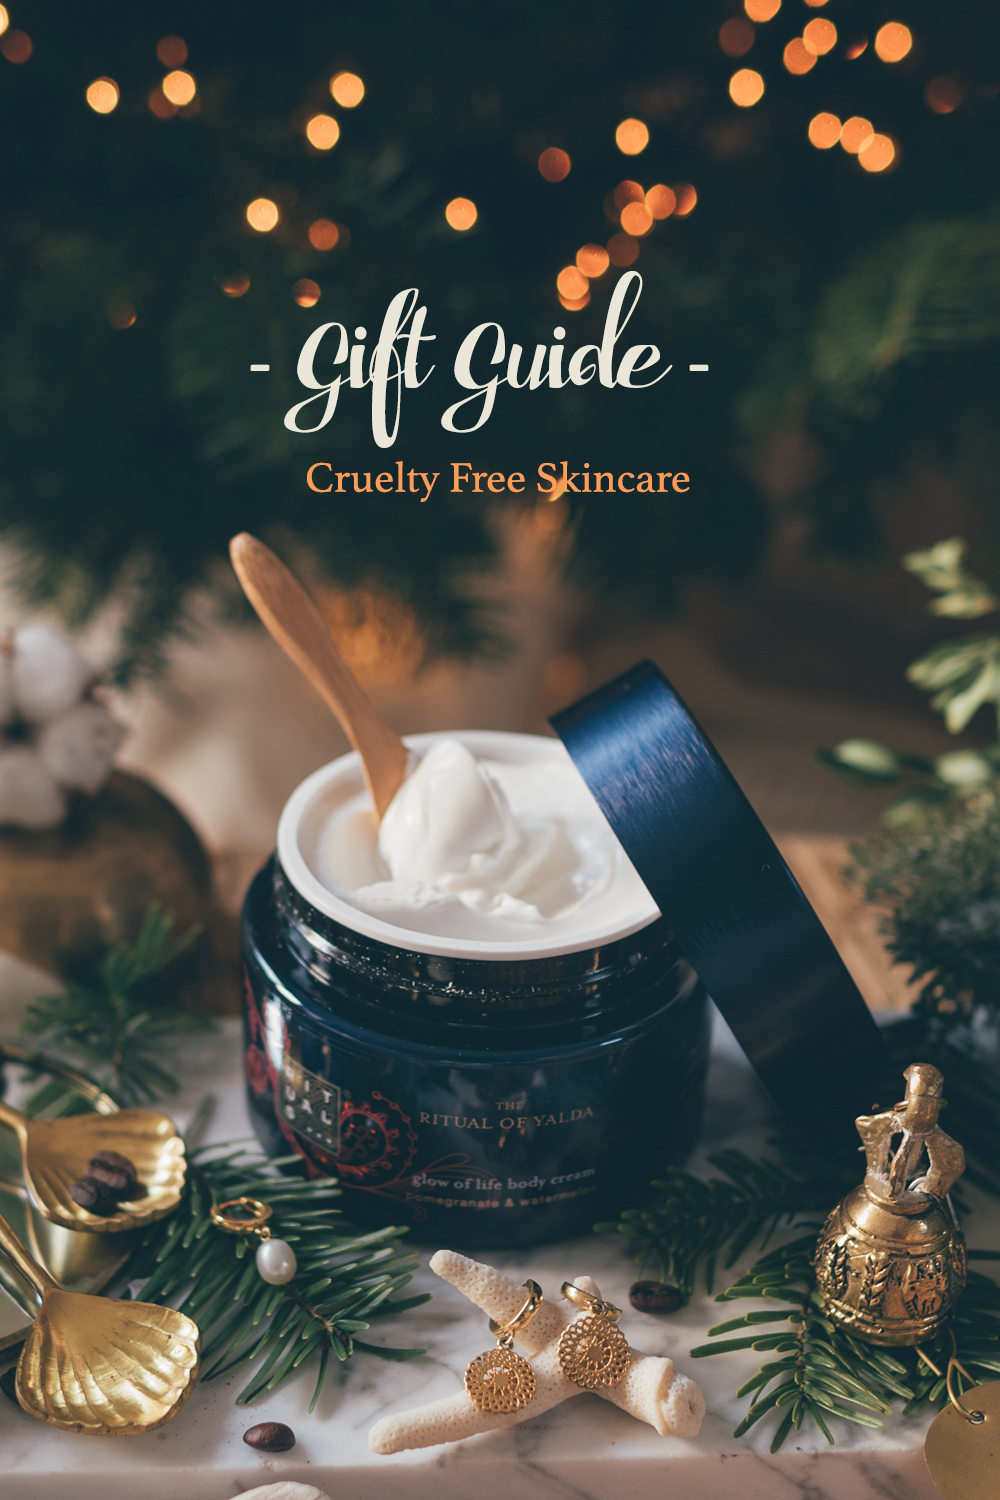 Sustainable Gift Guide cruelty free skincare 